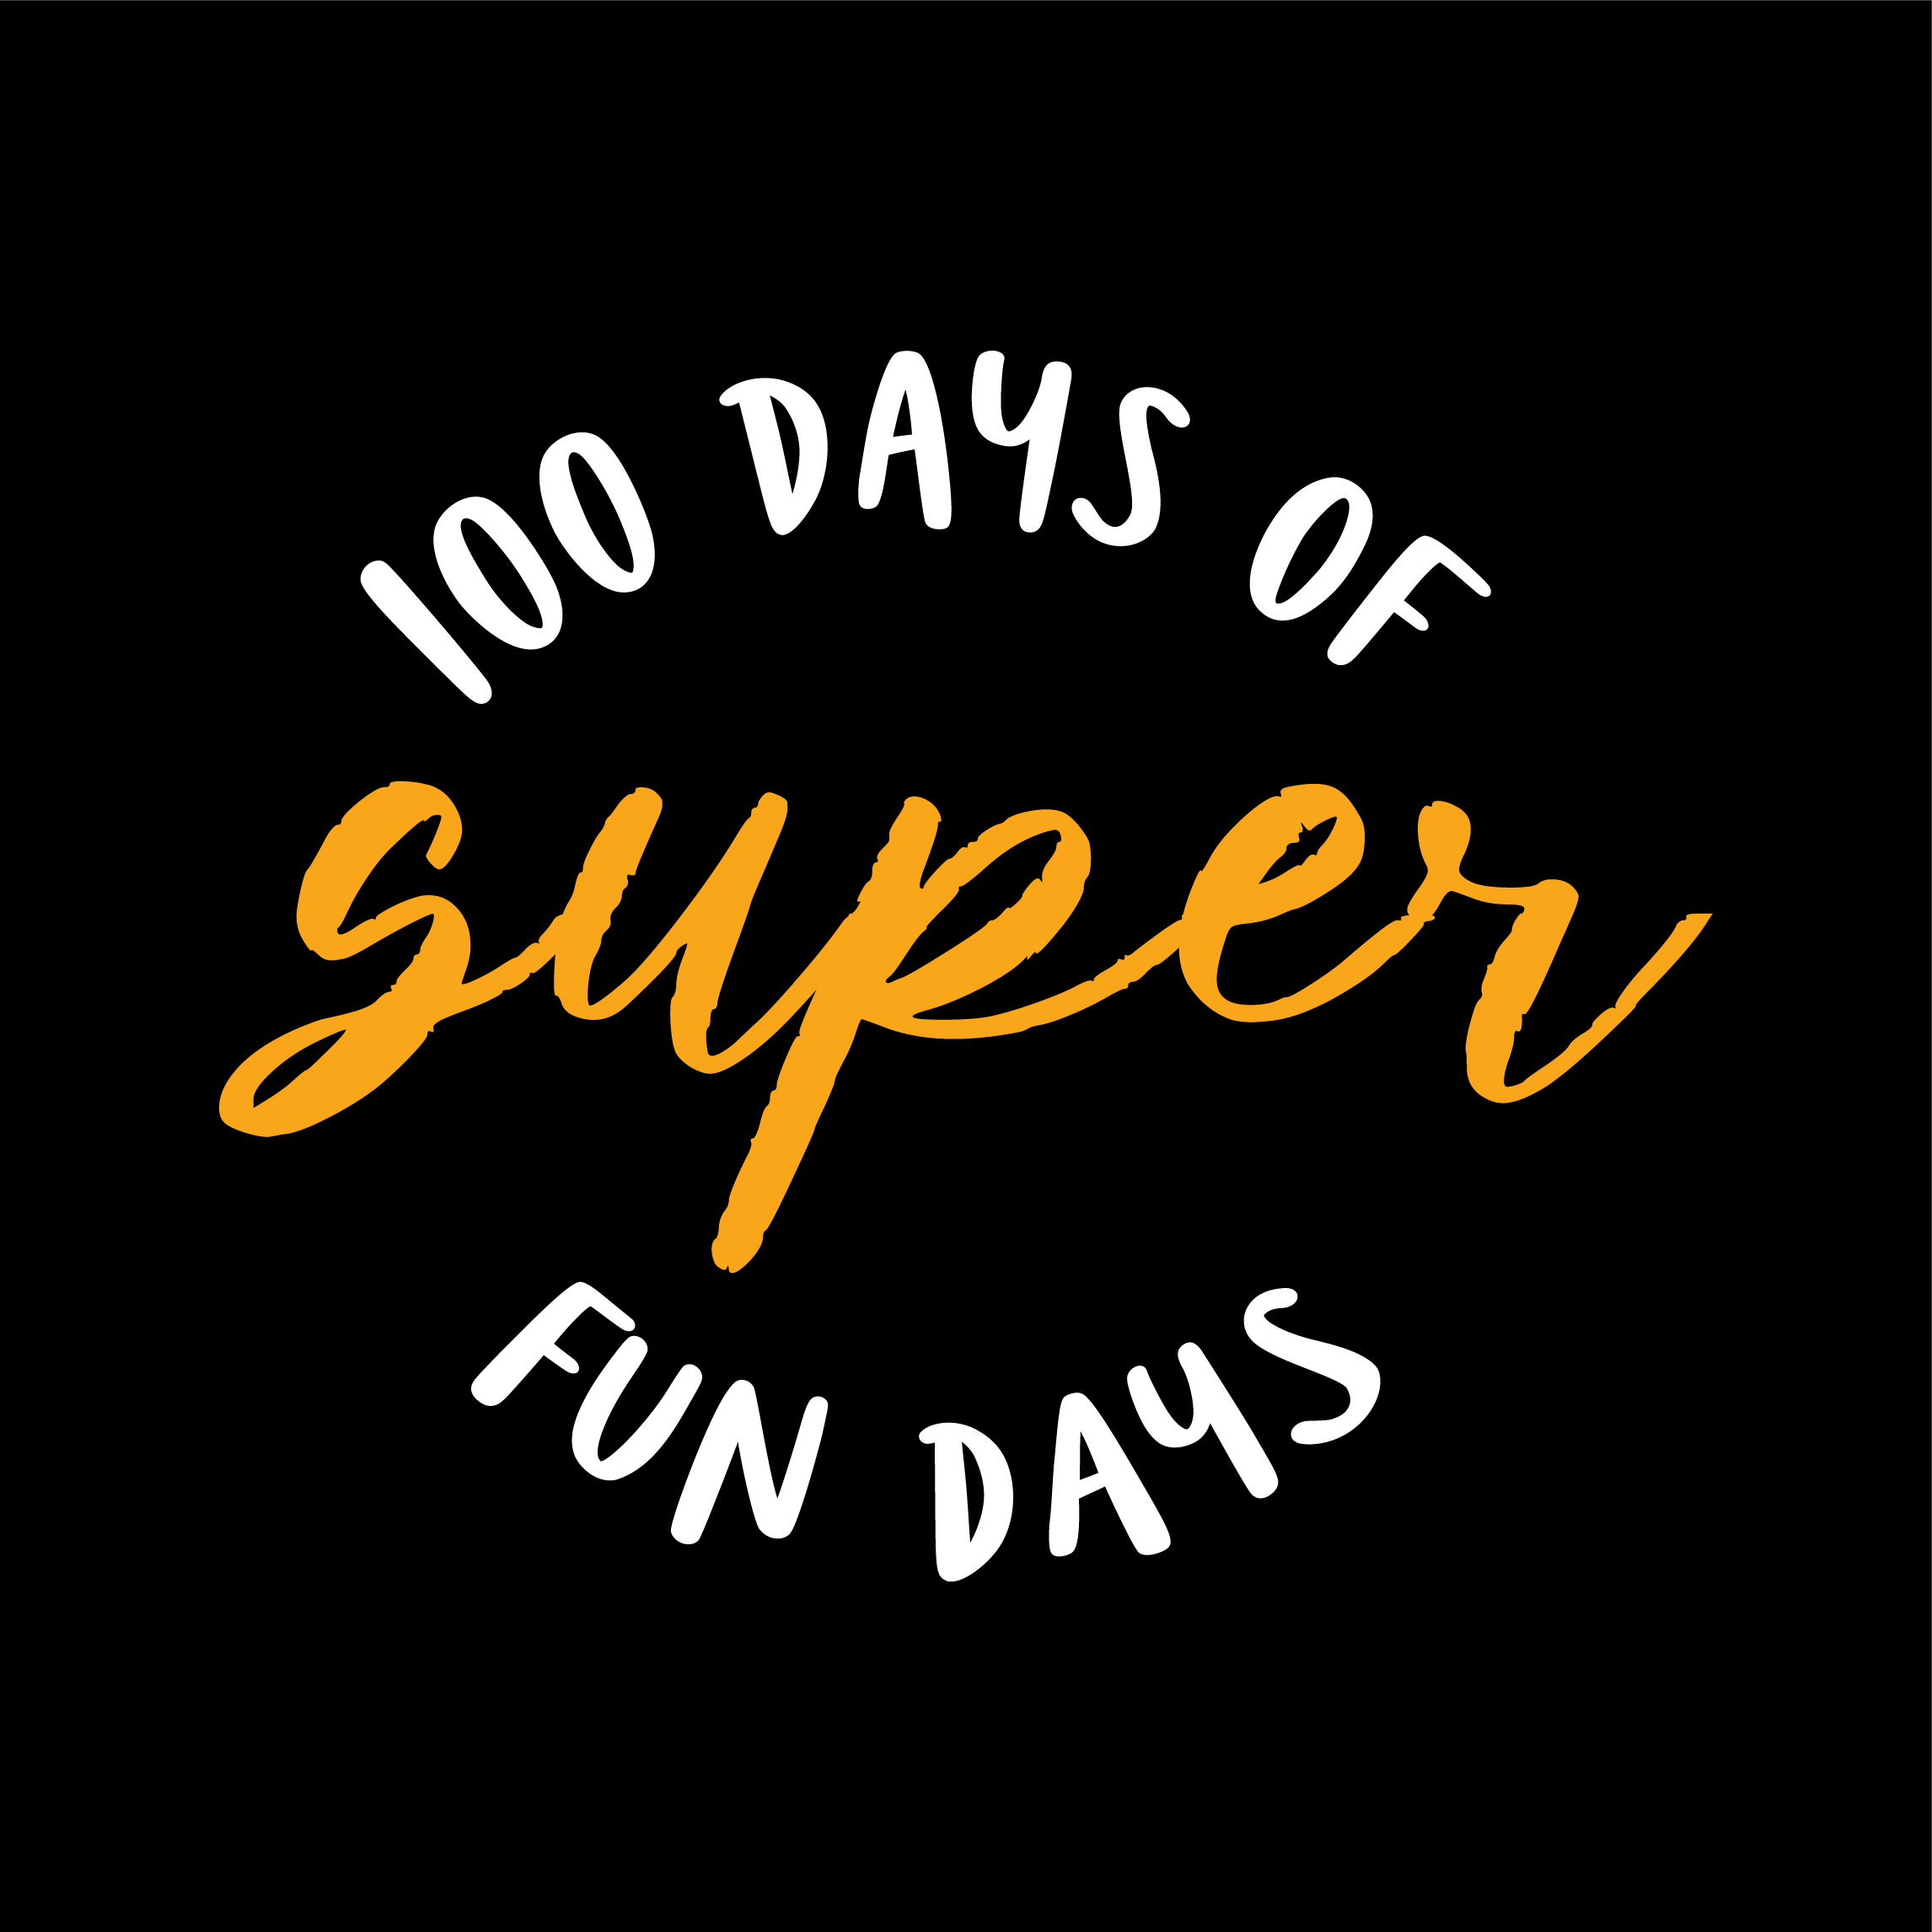 Black background with the words 100 days of super fun days.